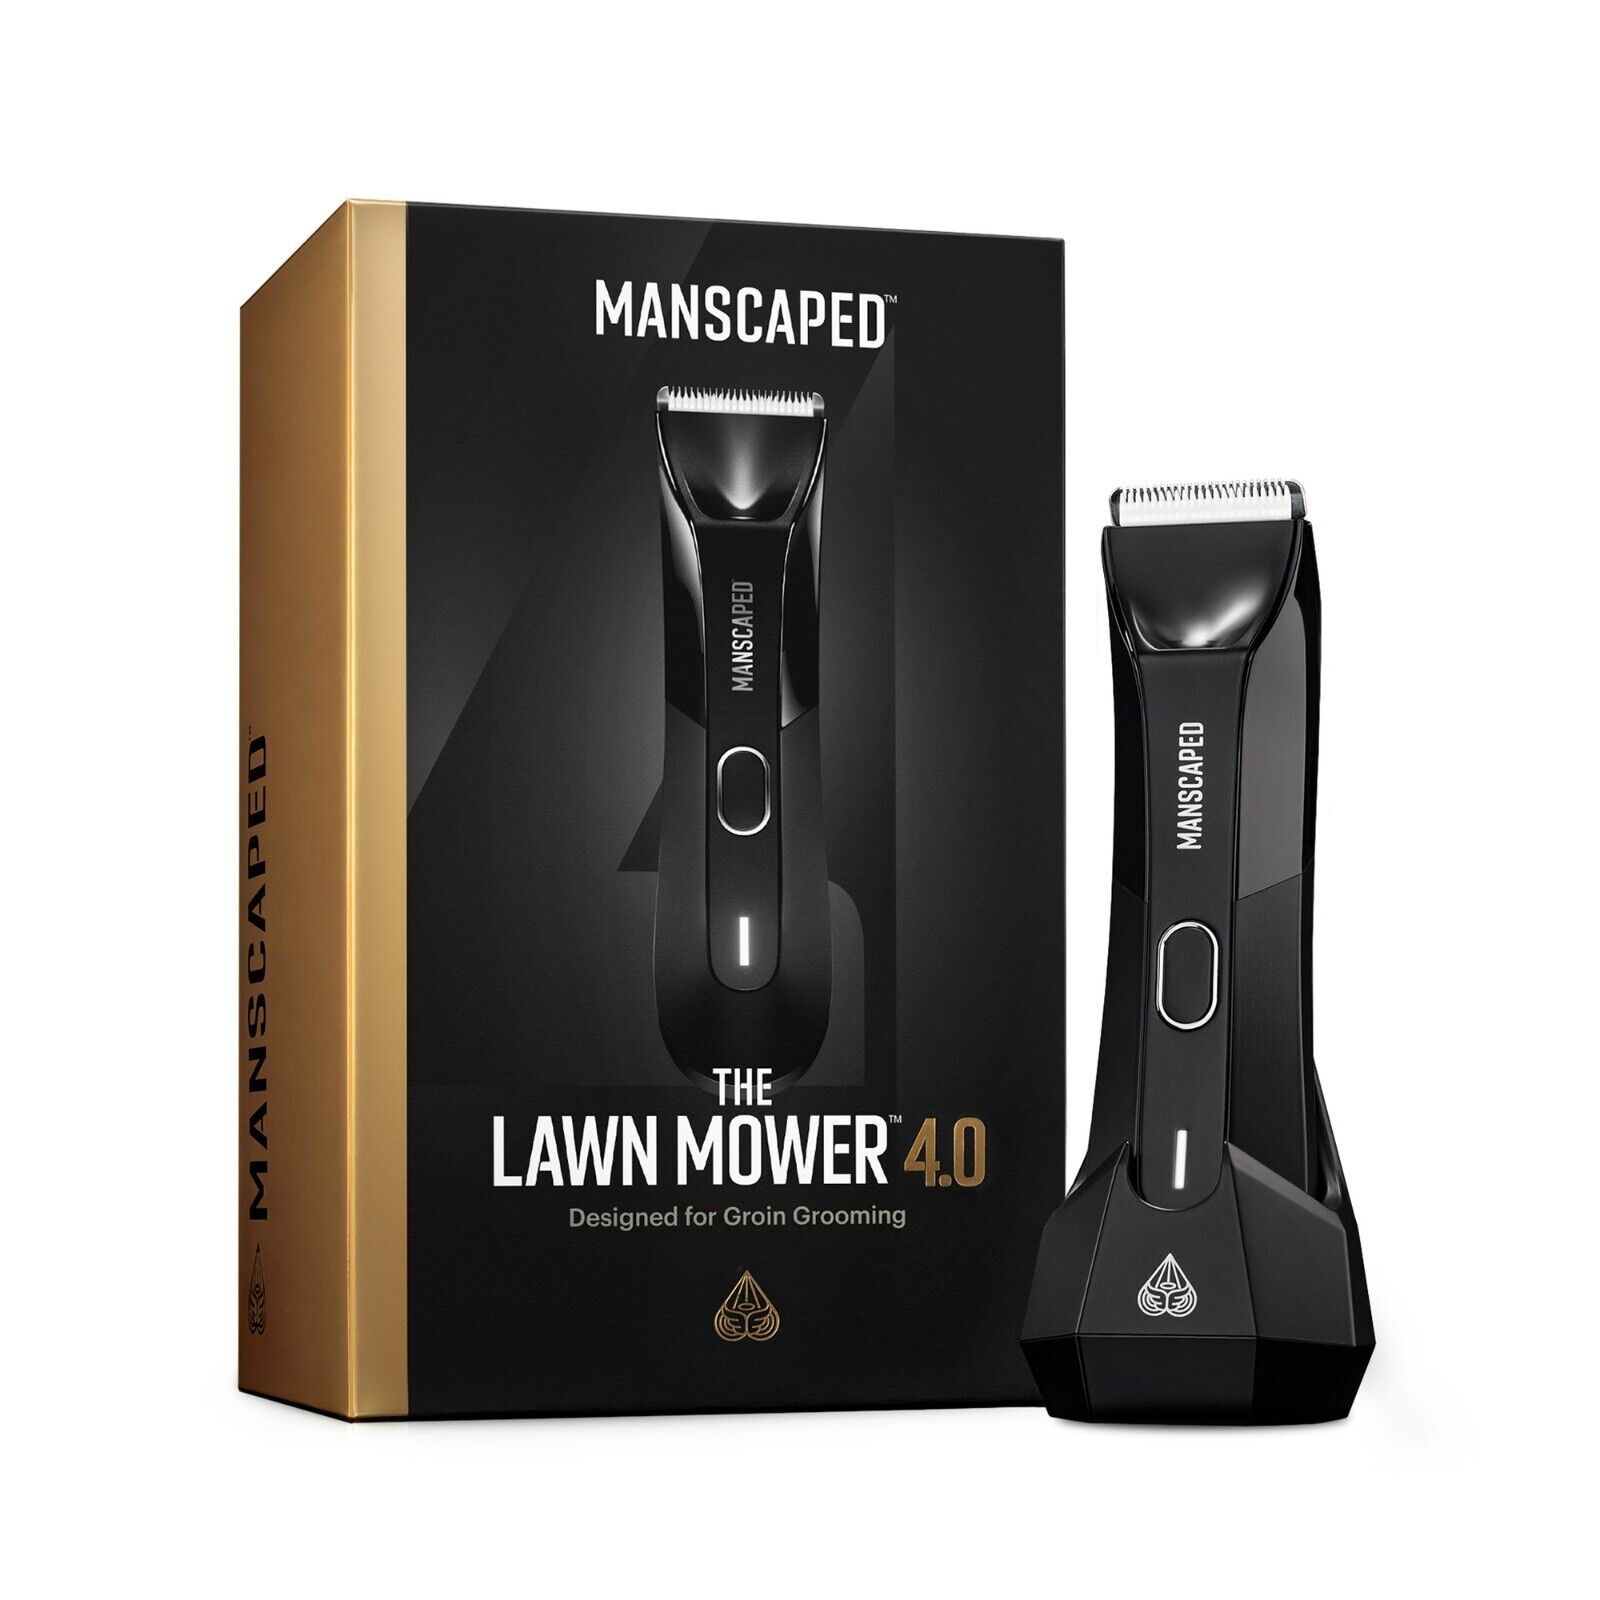 MANSCAPED® The Lawn Mower® 4.0 Electric Trimmer For Groin & Body Hair Grooming